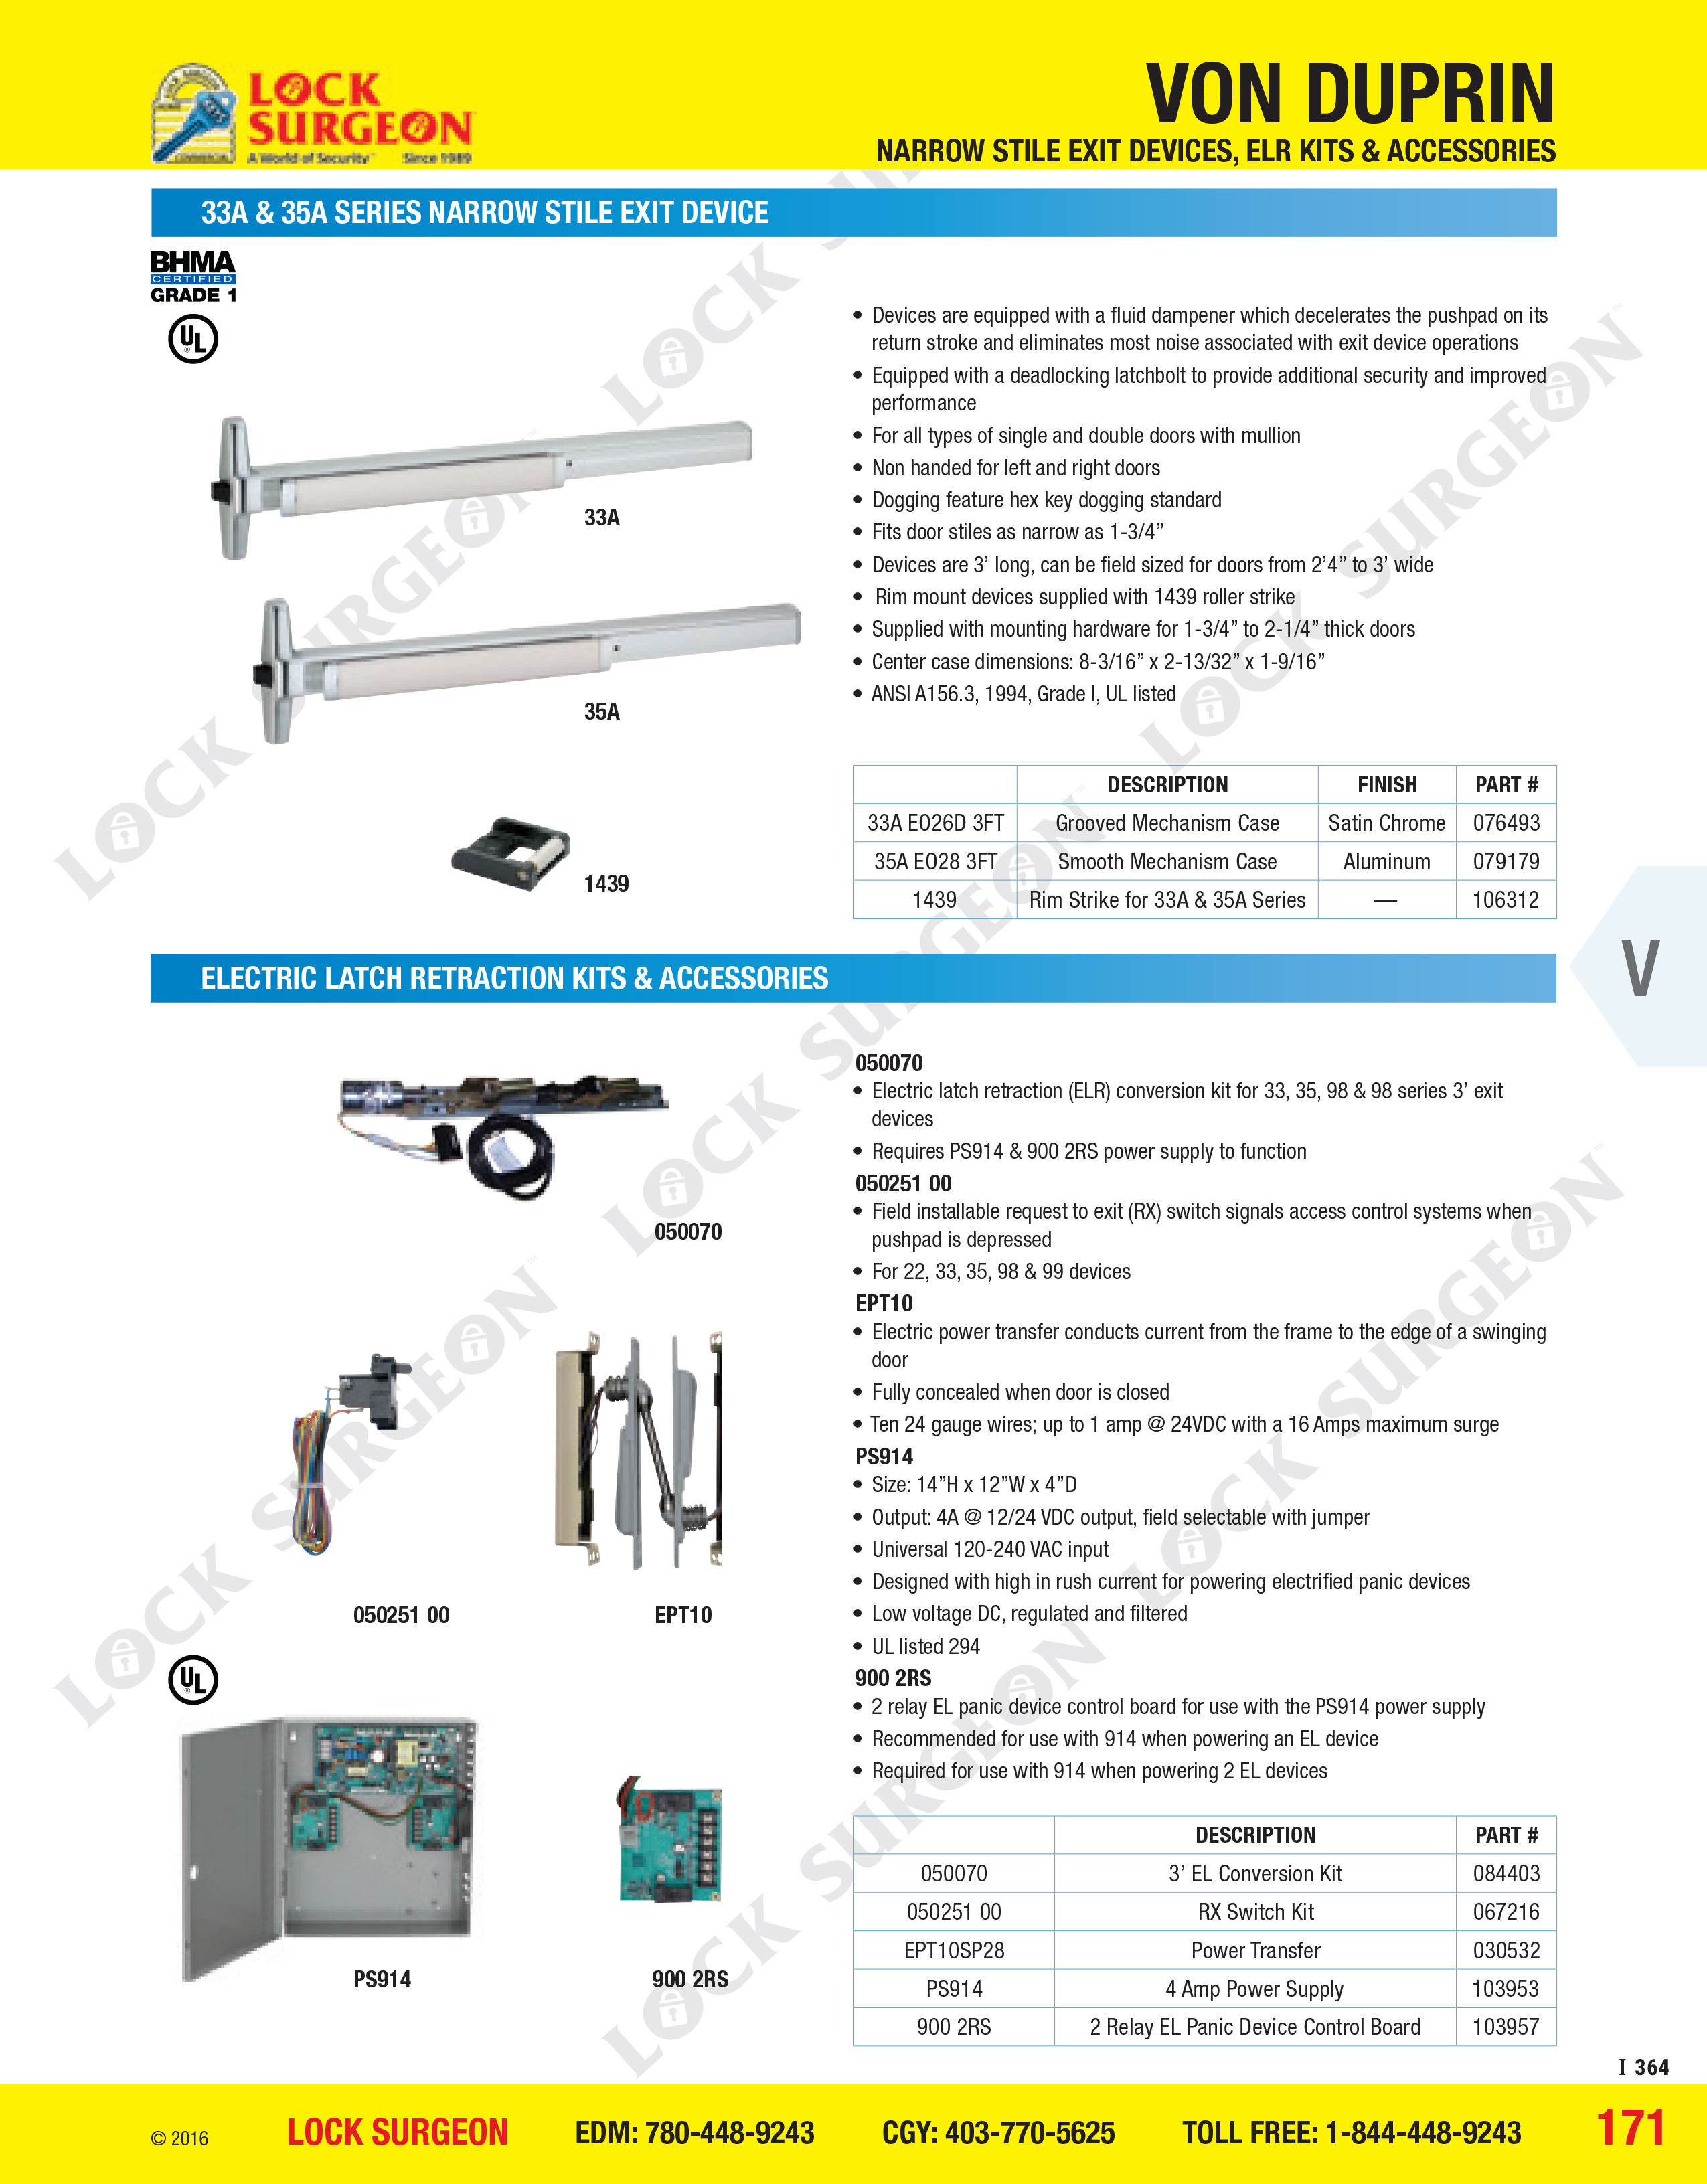 Von Duprin narrow stile exit device electronic latch retraction kits and accessories.